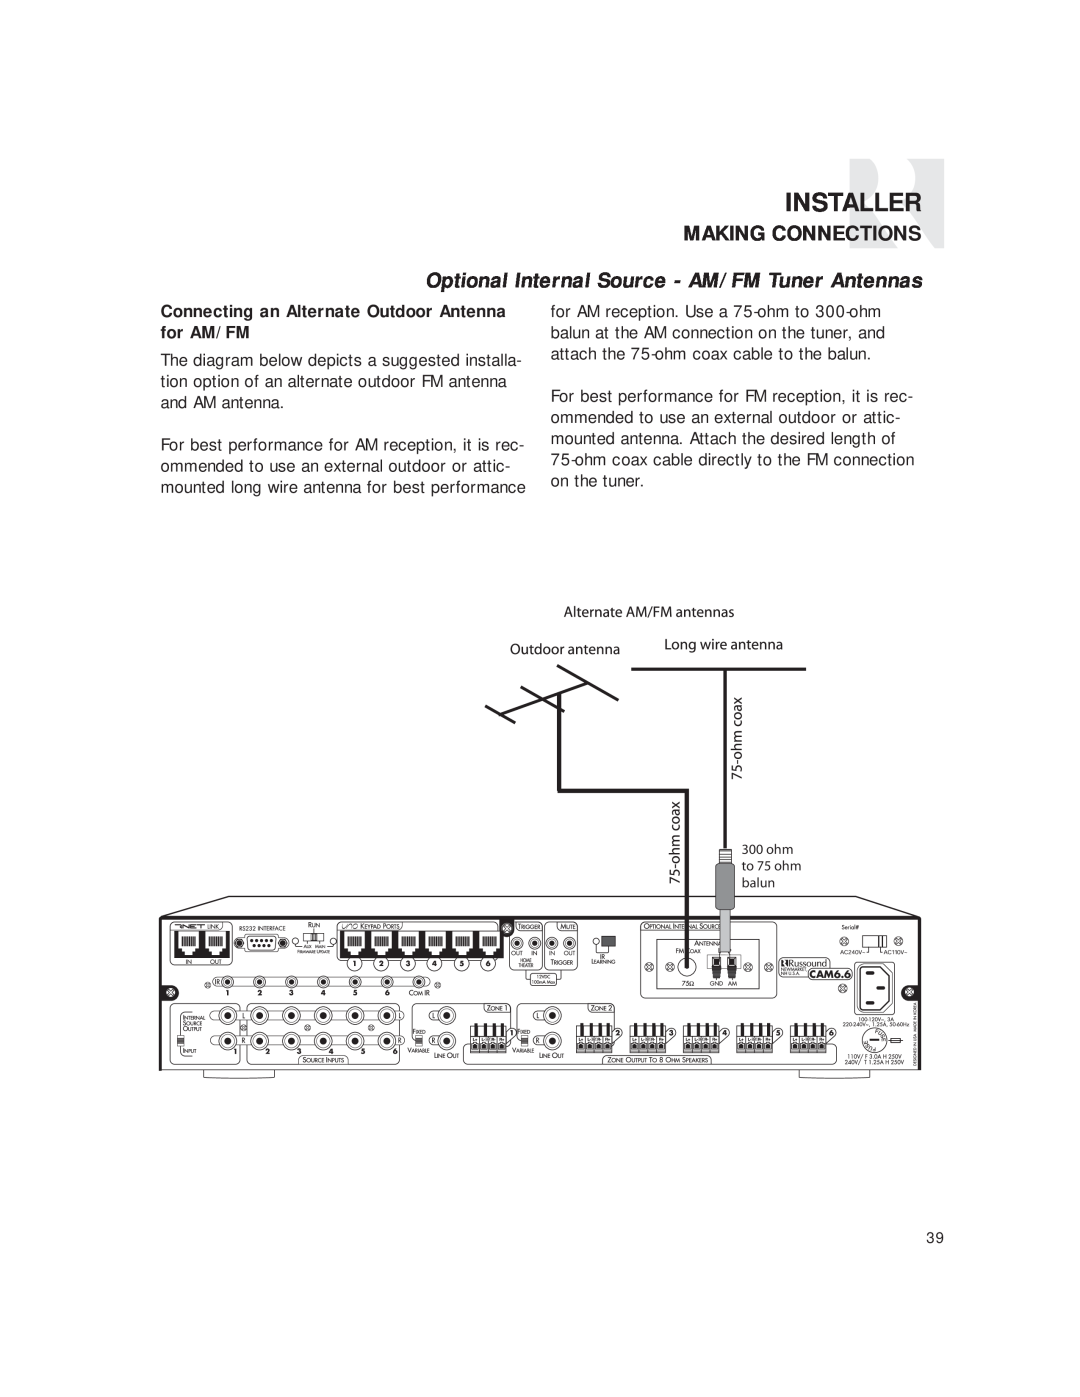 Russound CAM6.6T-S1 instruction manual Installer, Making Connections, Optional Internal Source - AM/FM Tuner Antennas 